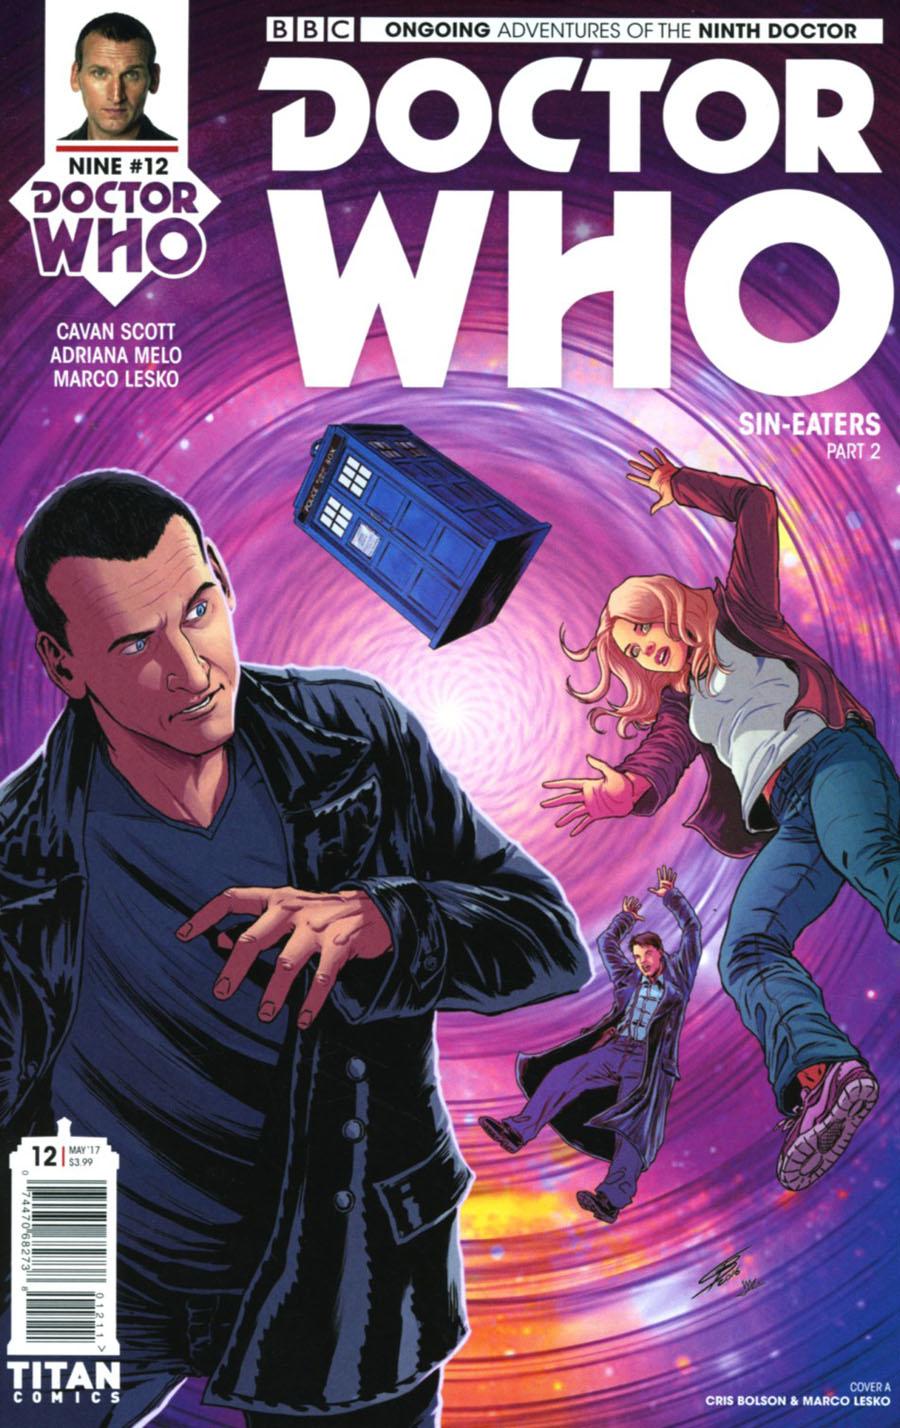 Doctor Who 9th Doctor Vol. 2 #12